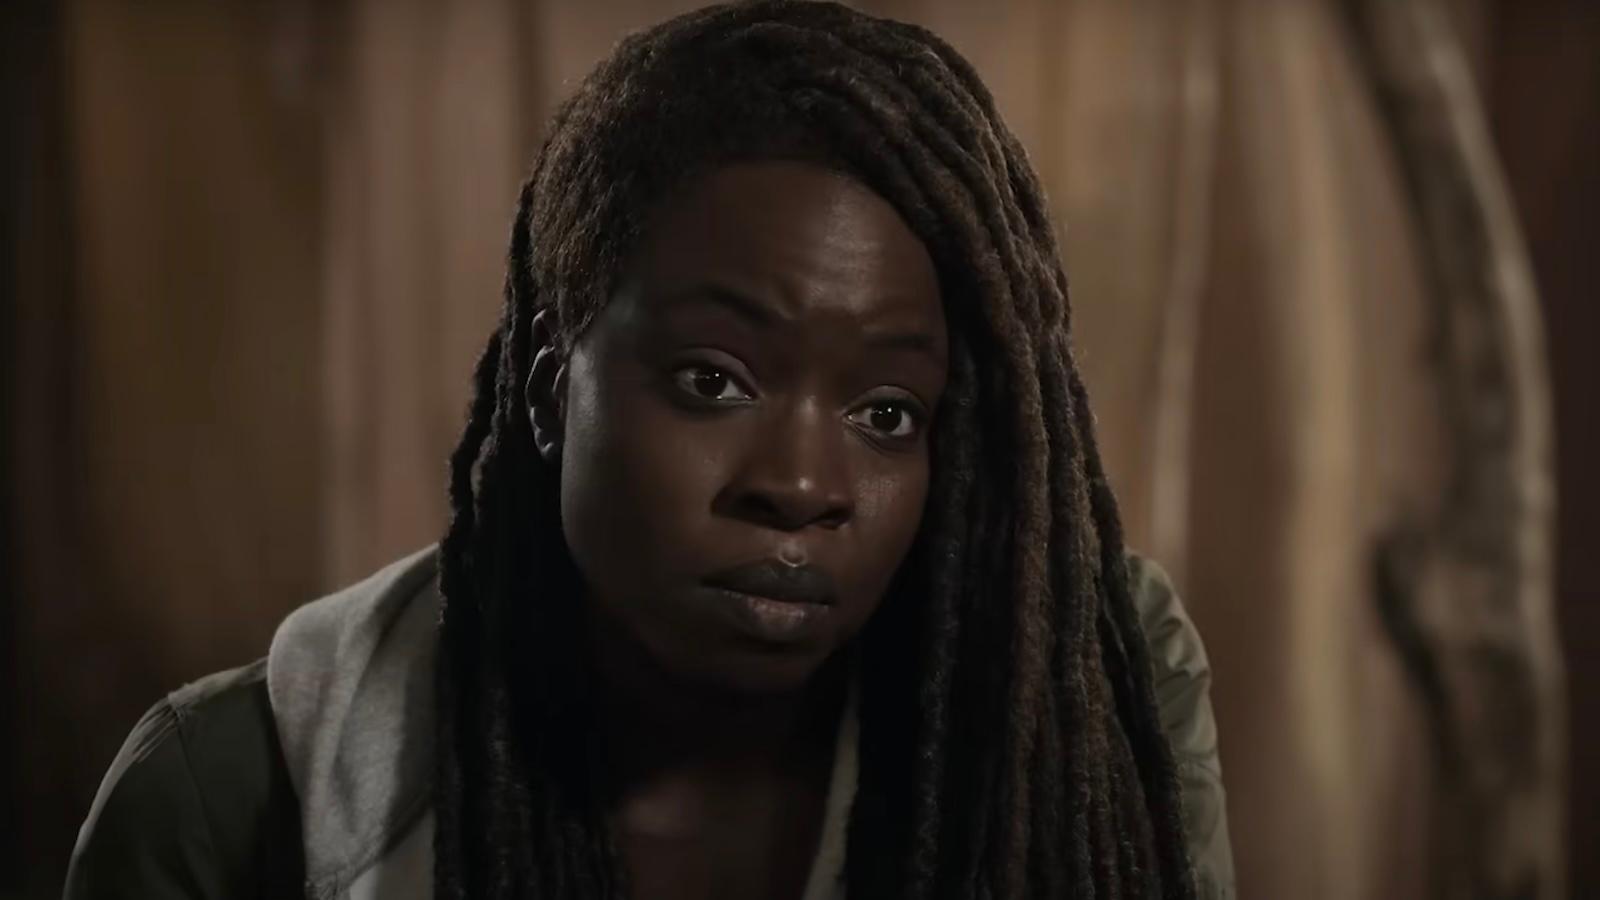 Danai Gurira as Michonne Grimes in The Walking Dead: The Ones Who Live